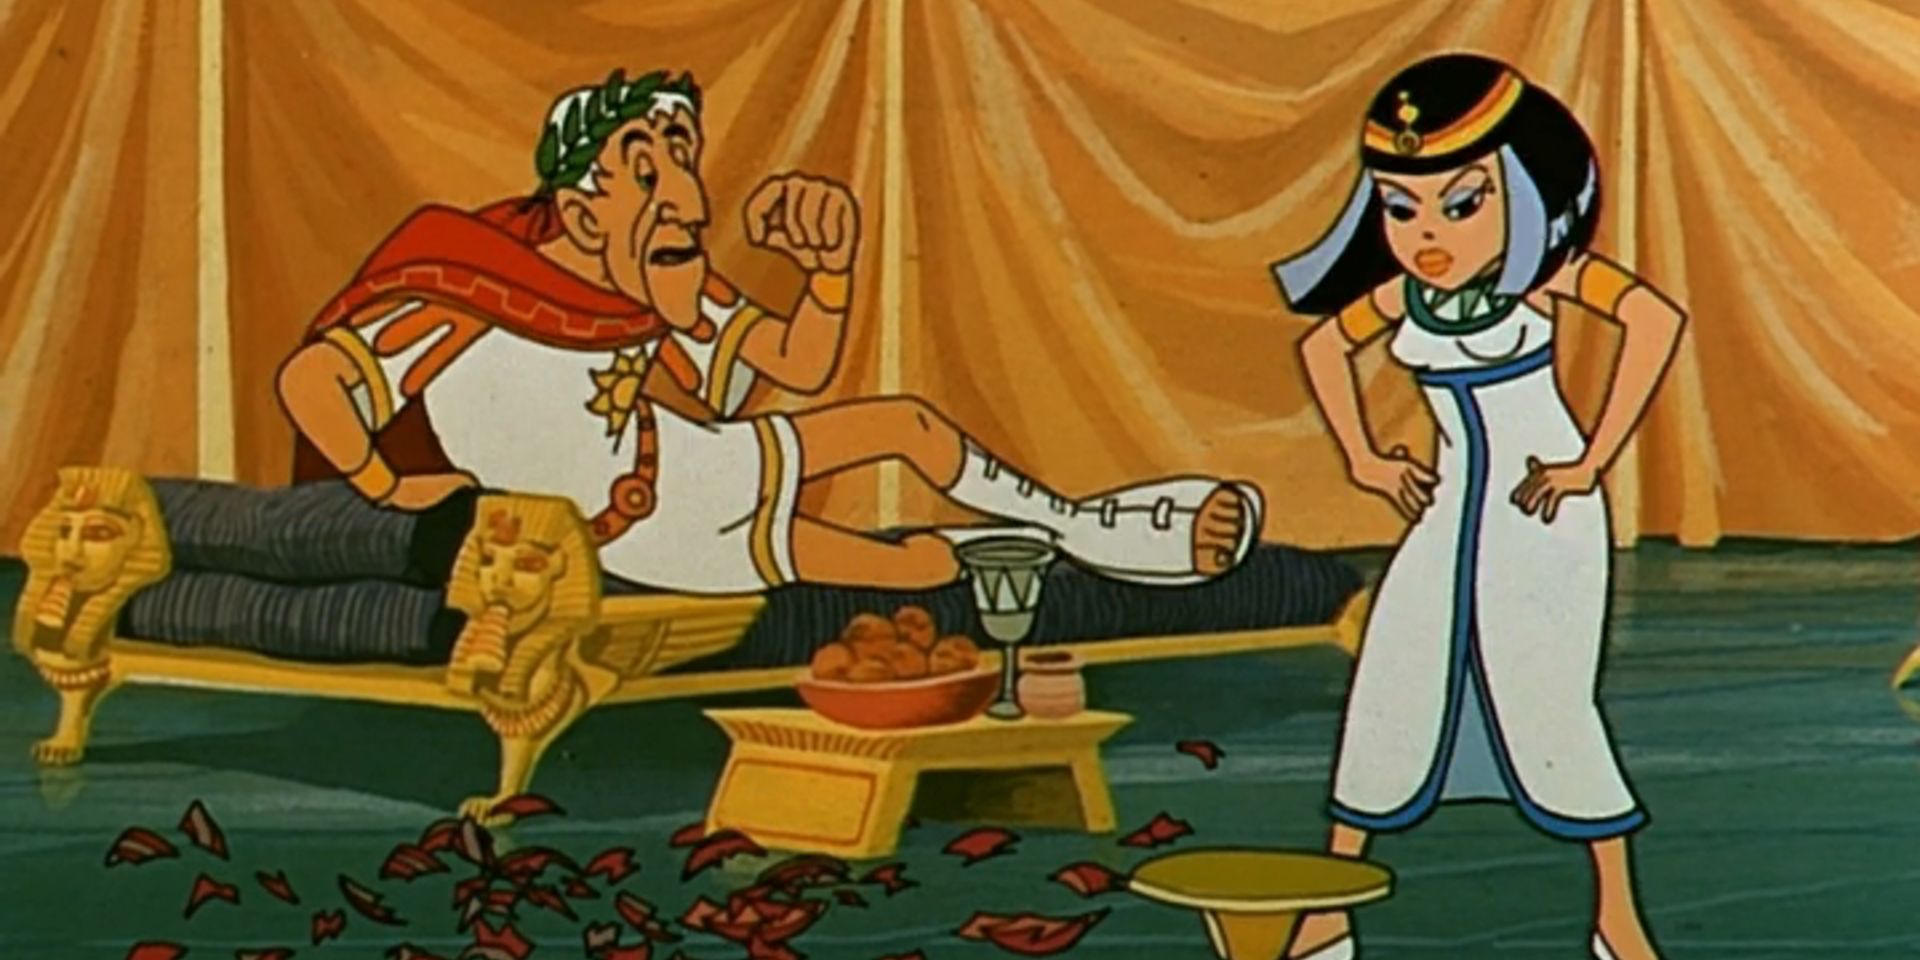 Caesar and Cleopatra argue in Asterix and cleopatra.